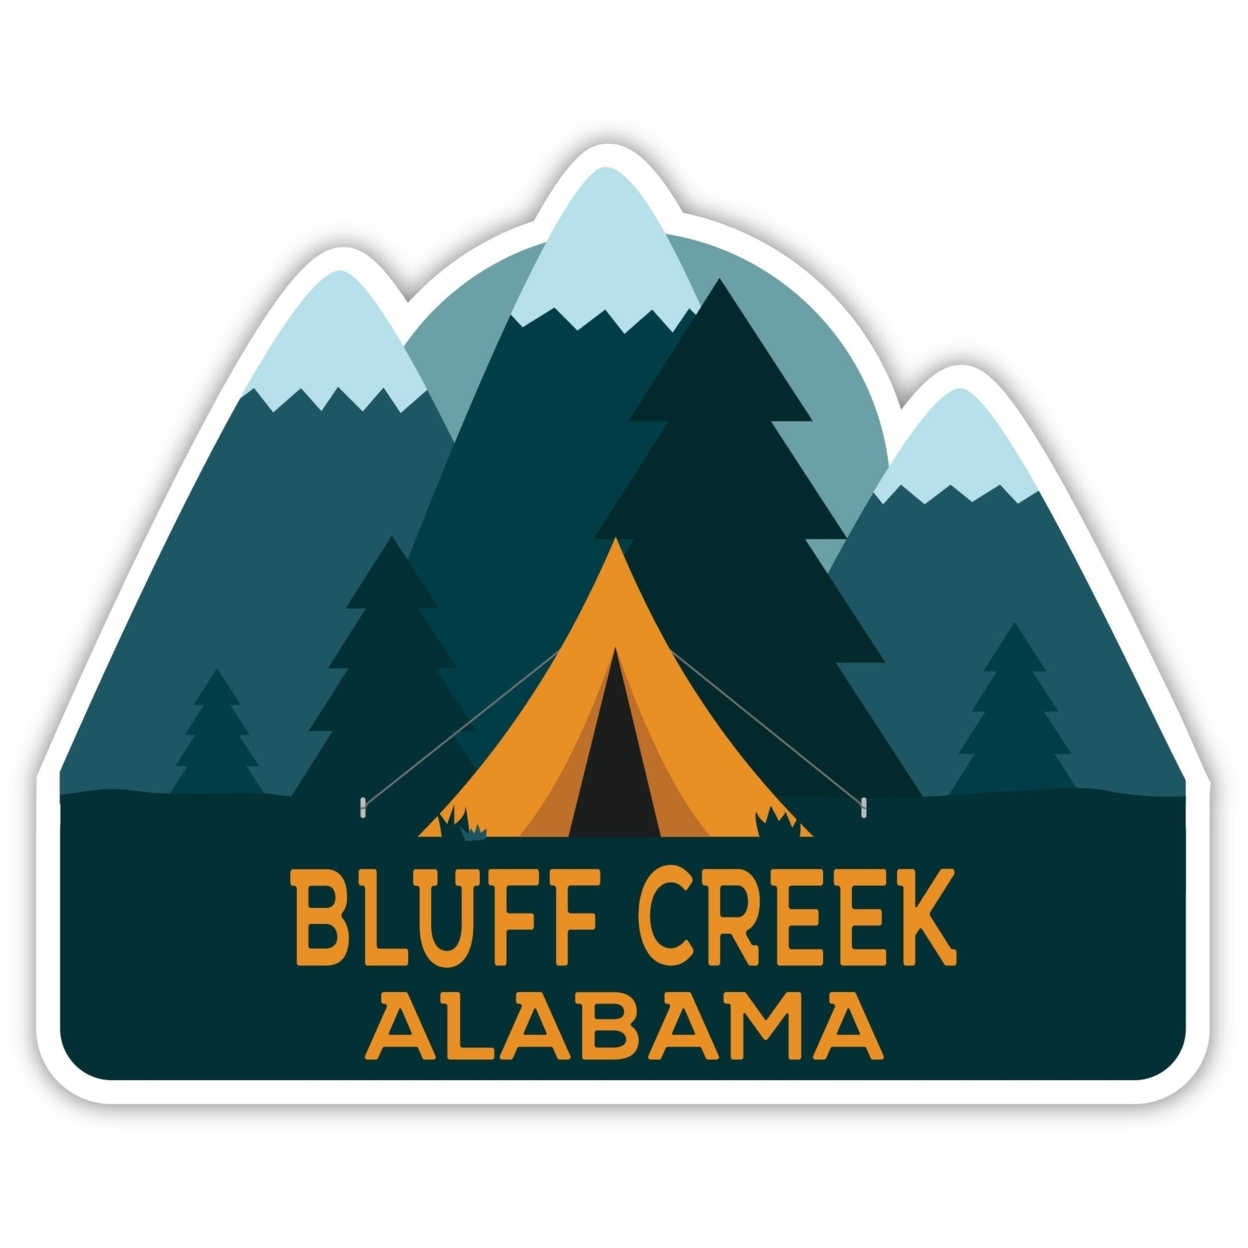 Bluff Creek Alabama Souvenir Decorative Stickers (Choose Theme And Size) - 4-Pack, 8-Inch, Tent